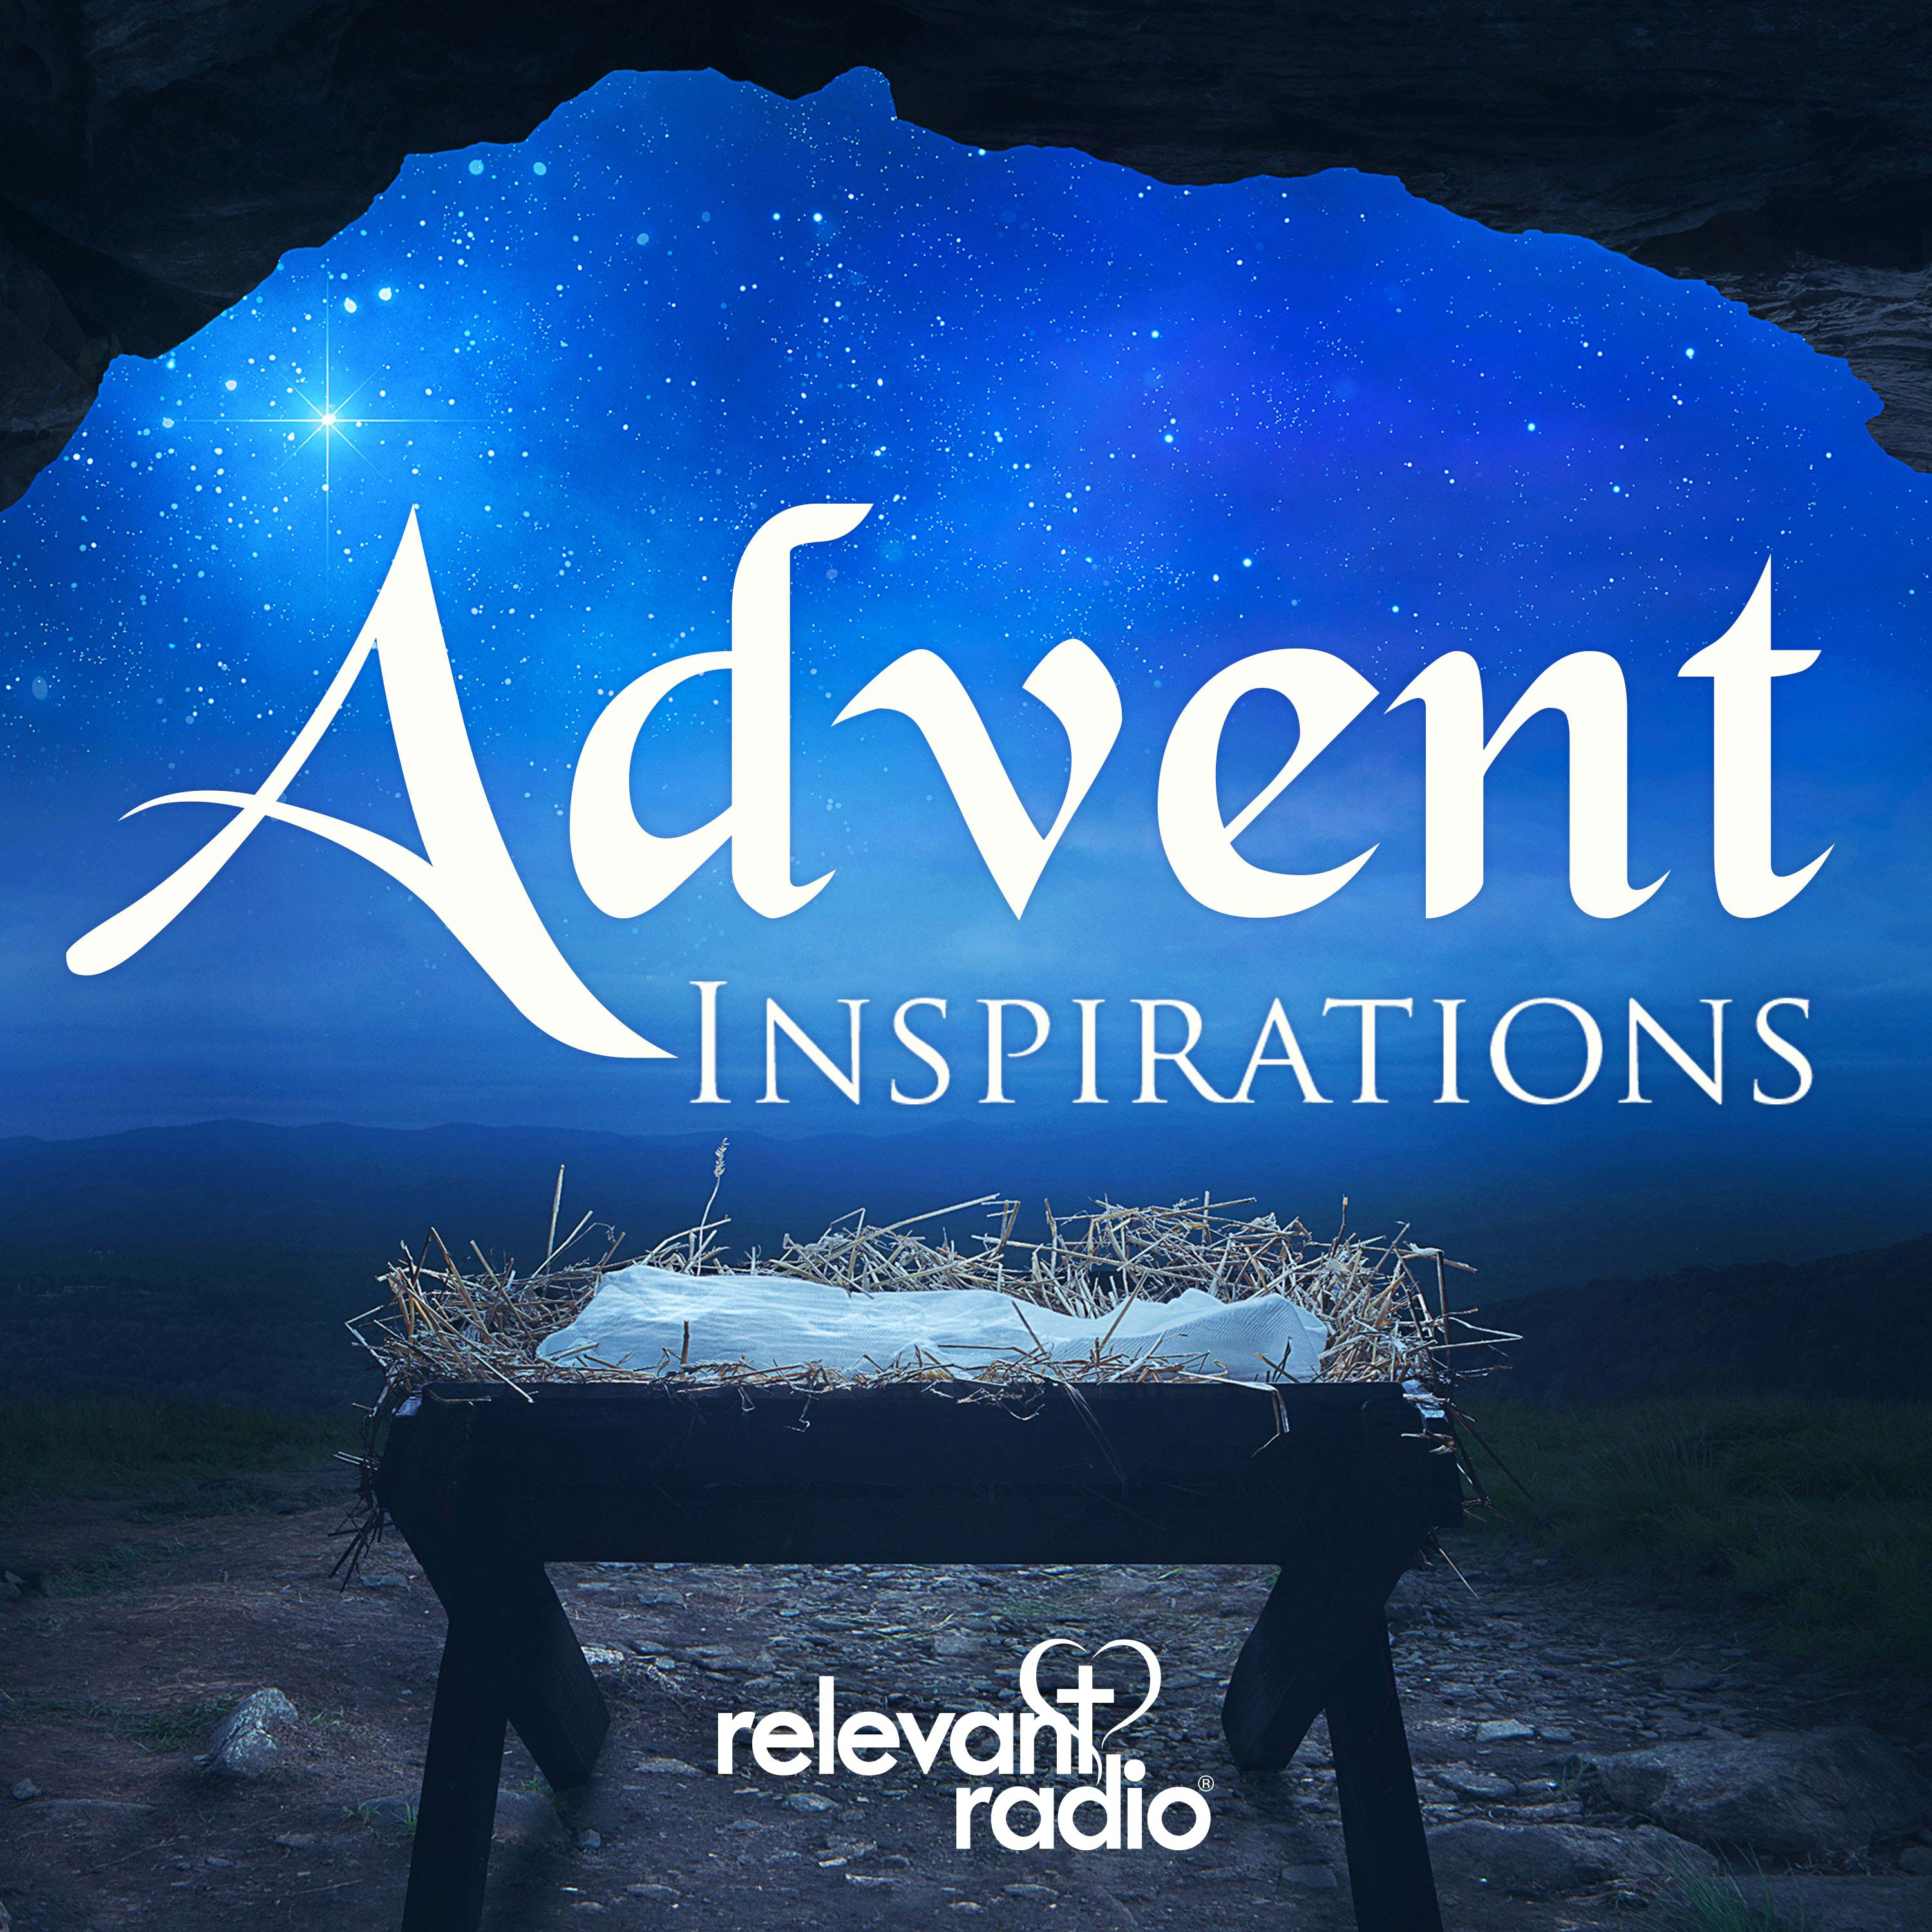 Advent Inspiration 1: Make it a great Advent